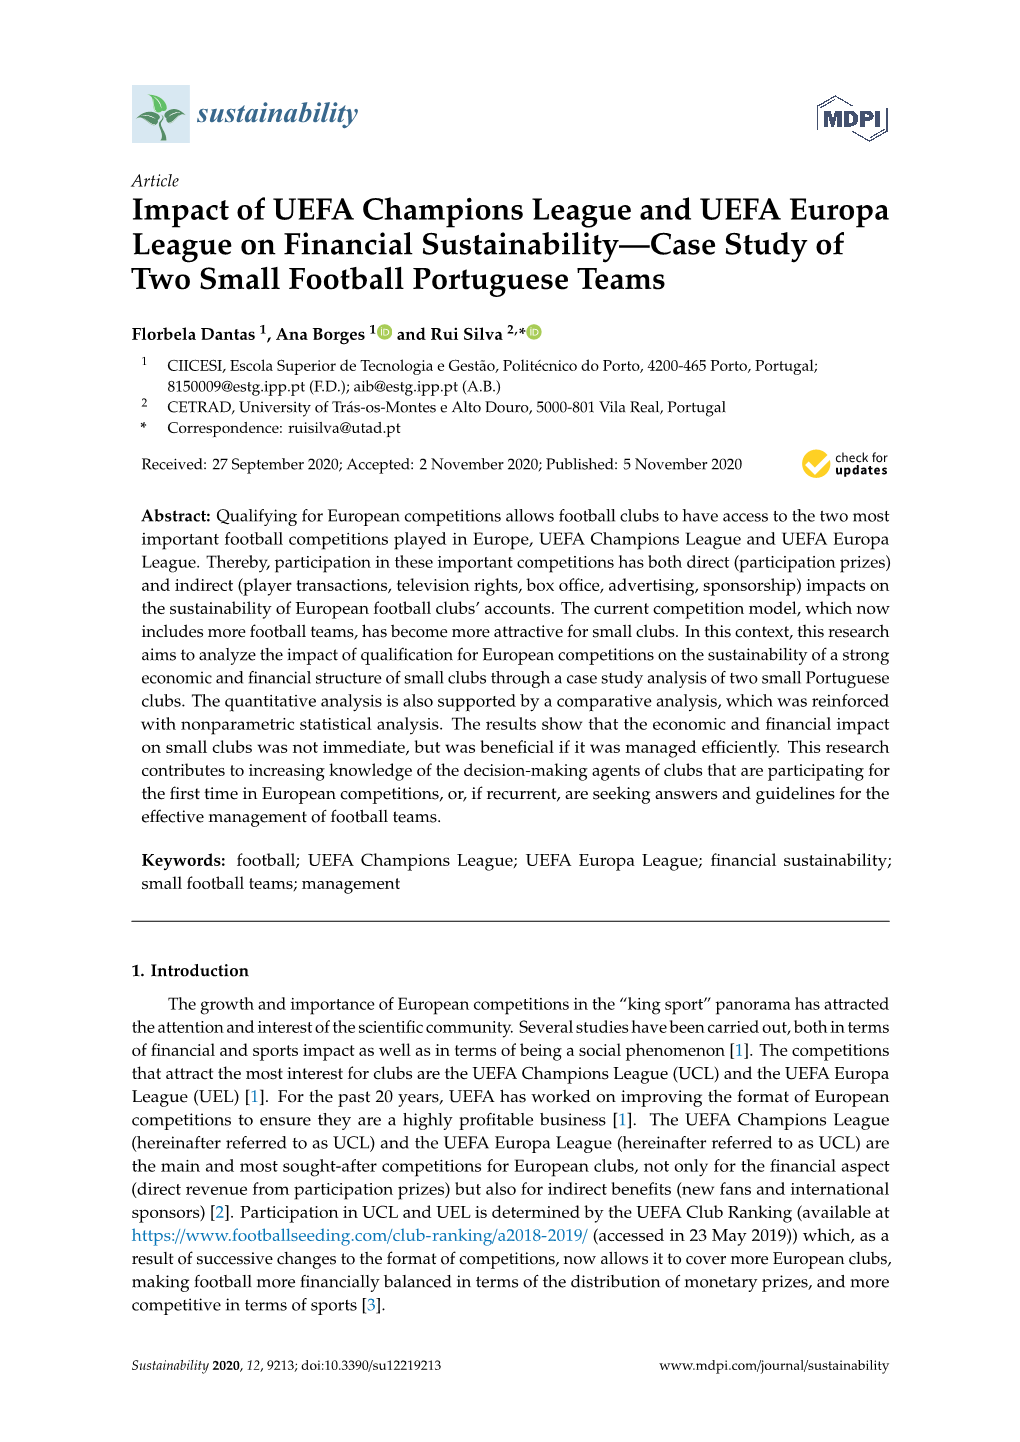 Impact of UEFA Champions League and UEFA Europa League on Financial Sustainability—Case Study of Two Small Football Portuguese Teams